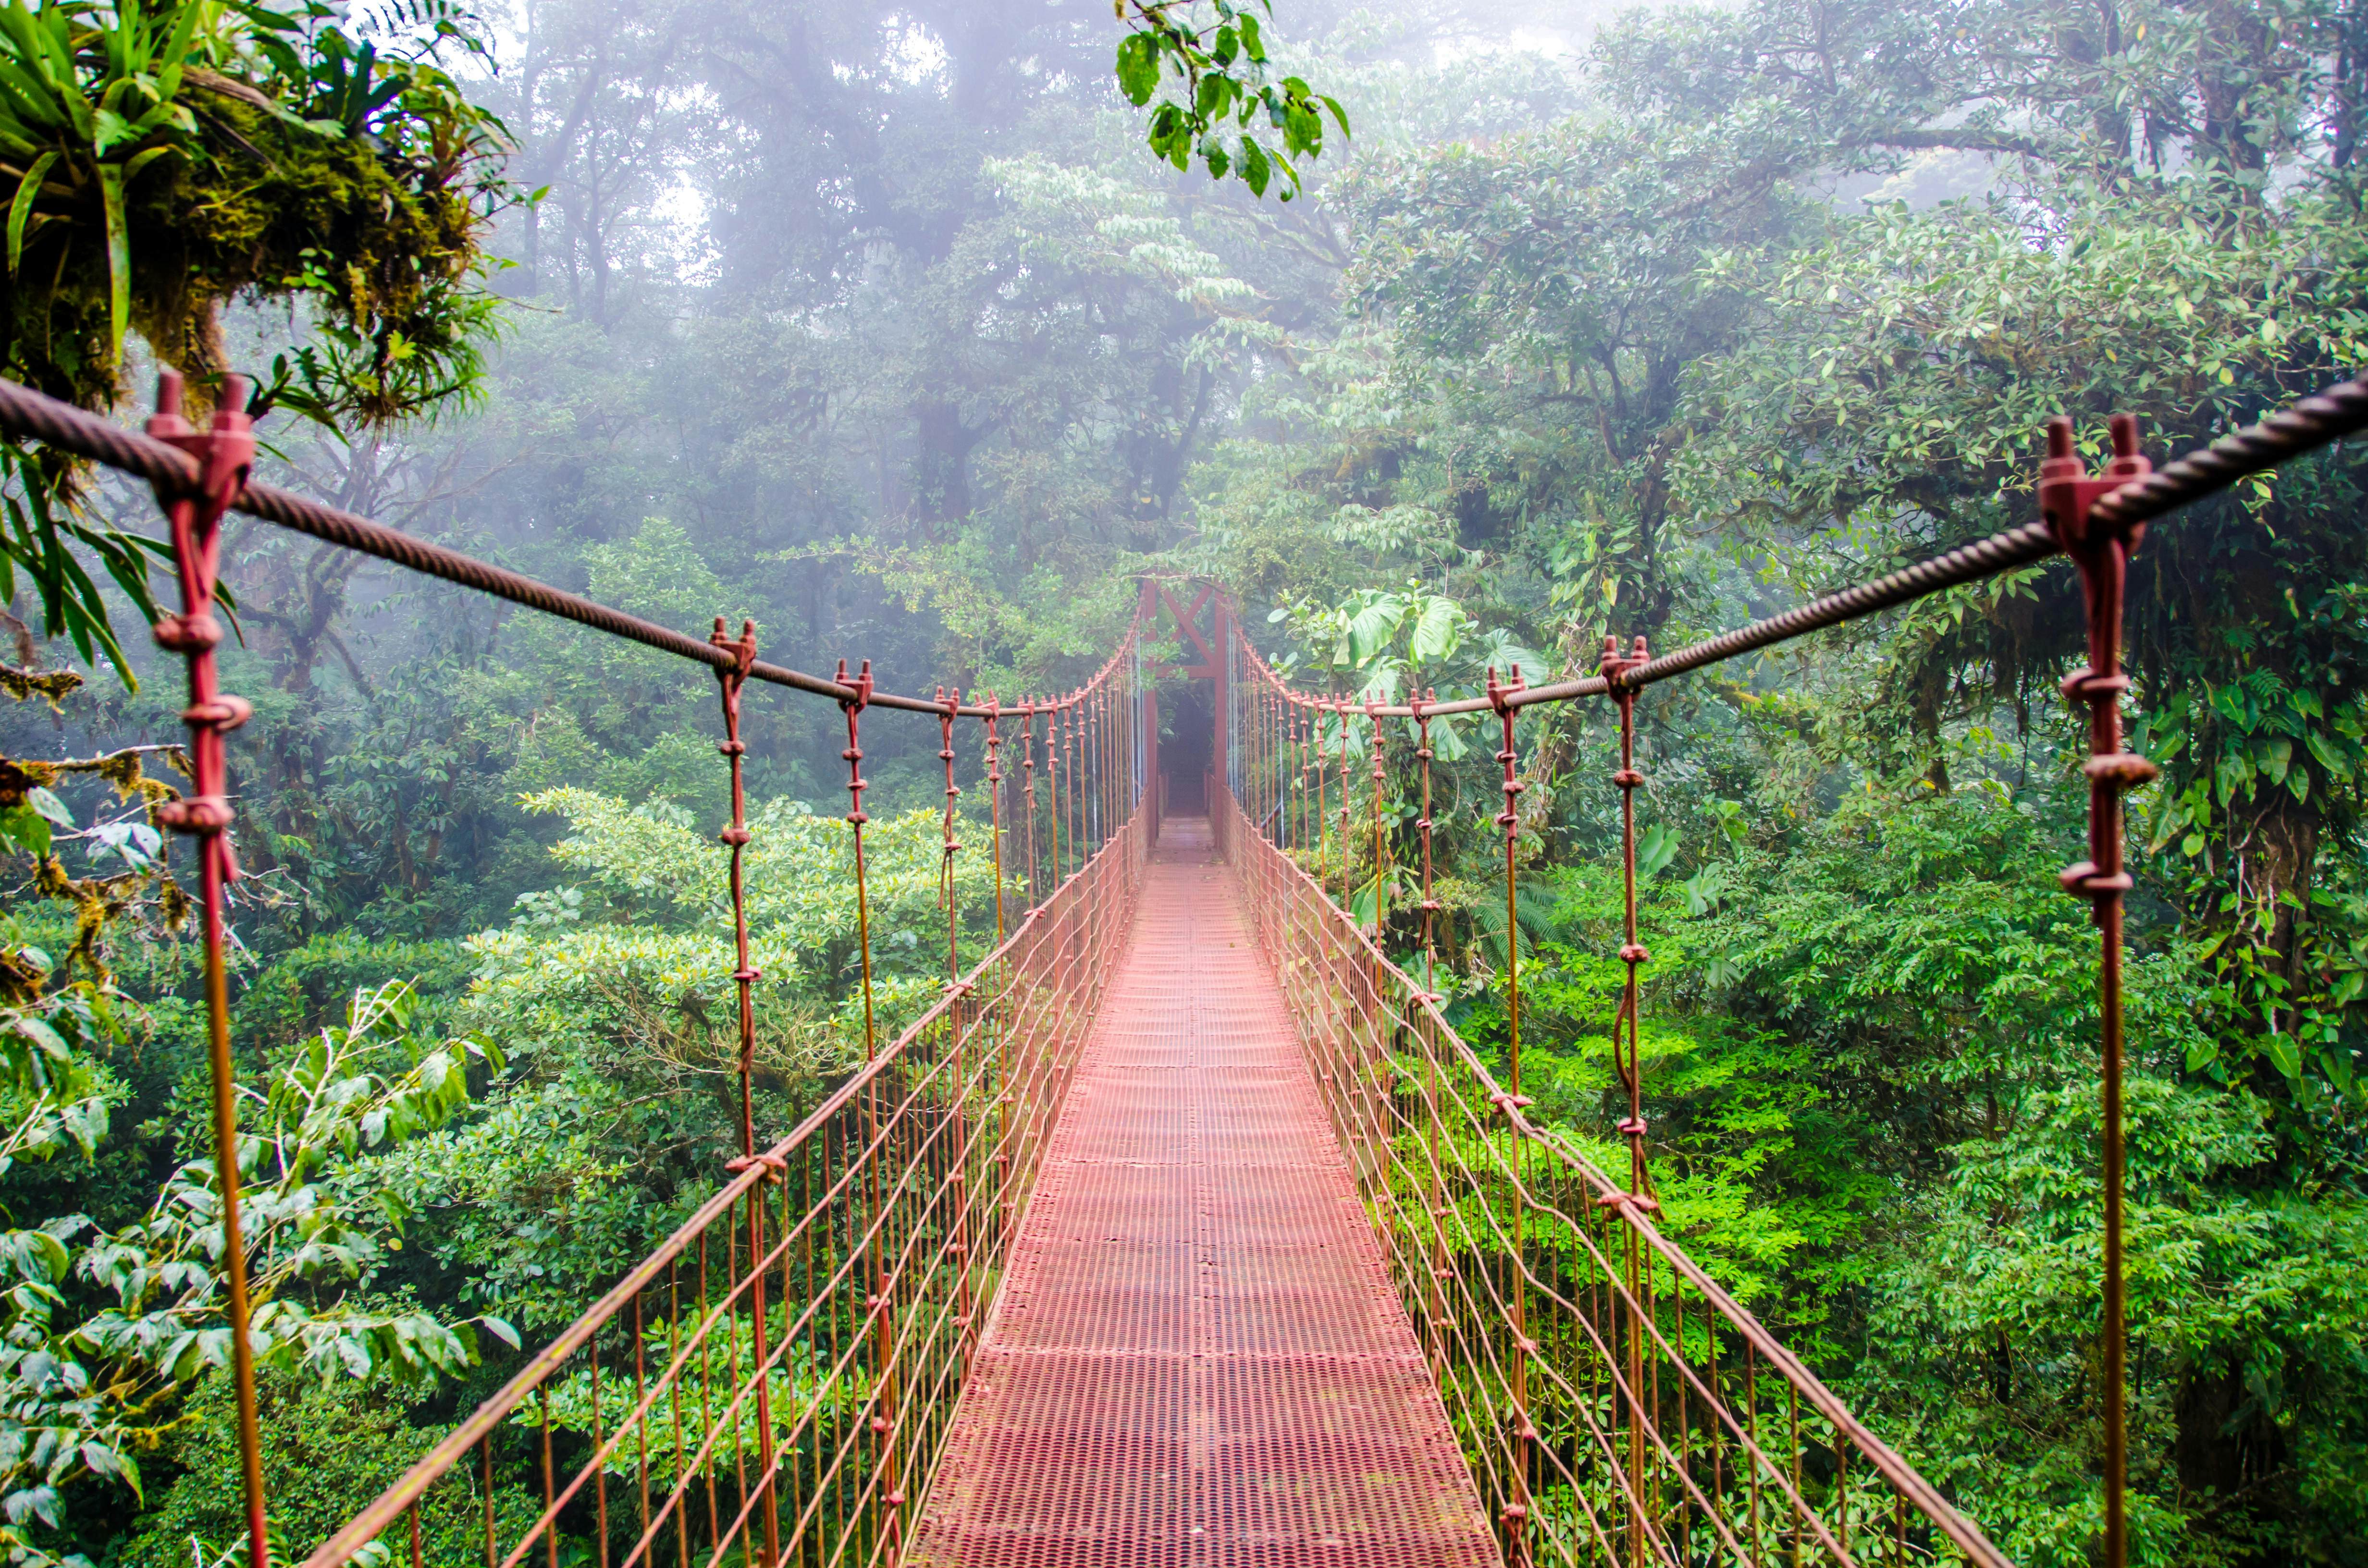 Best canopy walkways in the world - Lonely Planet